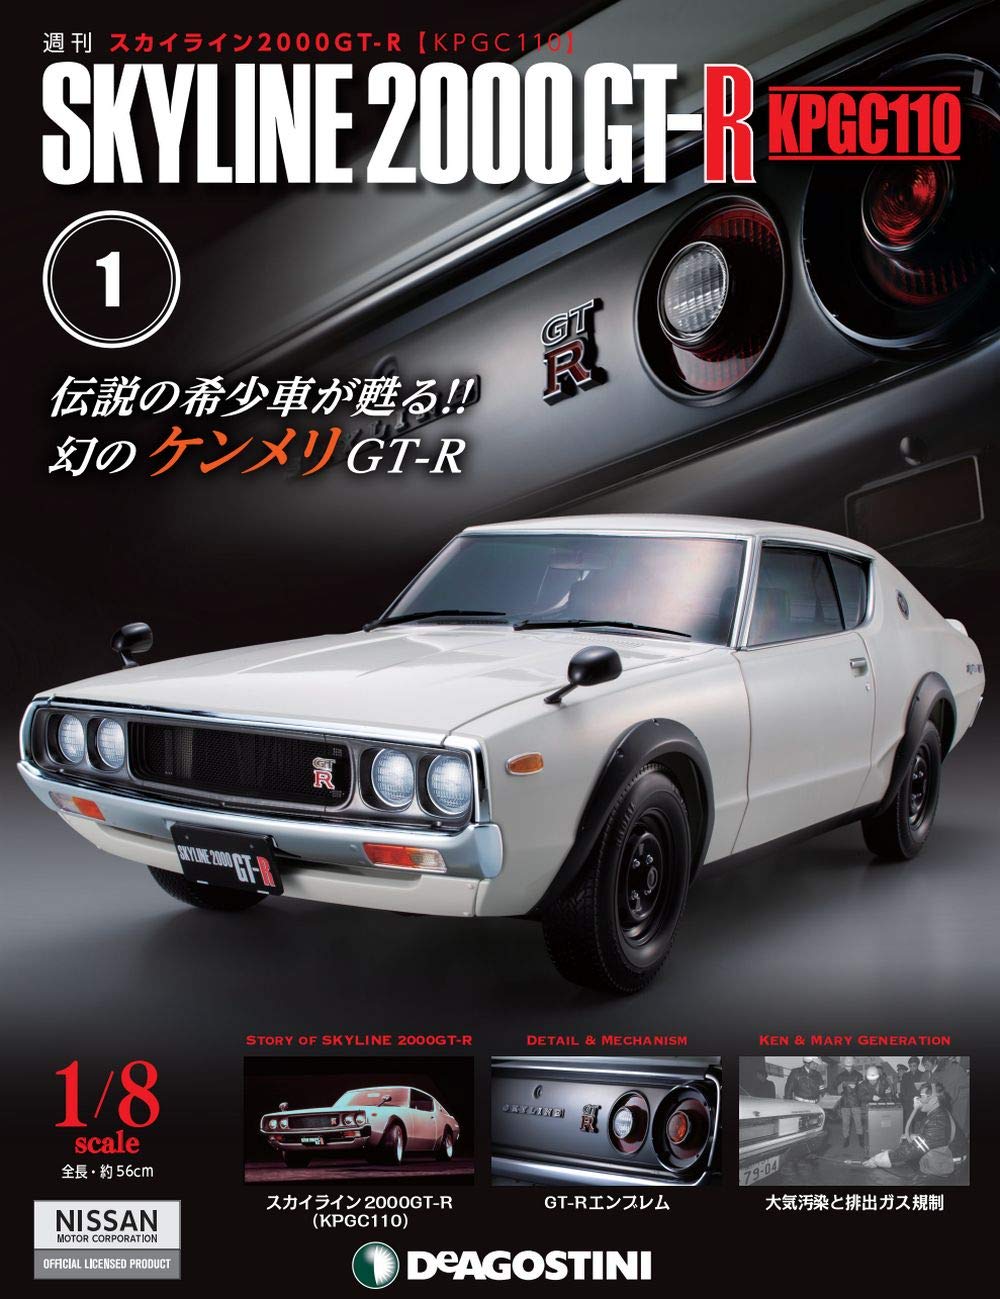 Details about   DeAGOSTINI Weekly NISSAN SKYLINE GT-R 2000 KPGC110 1/8 Scale No.6 from Japan 